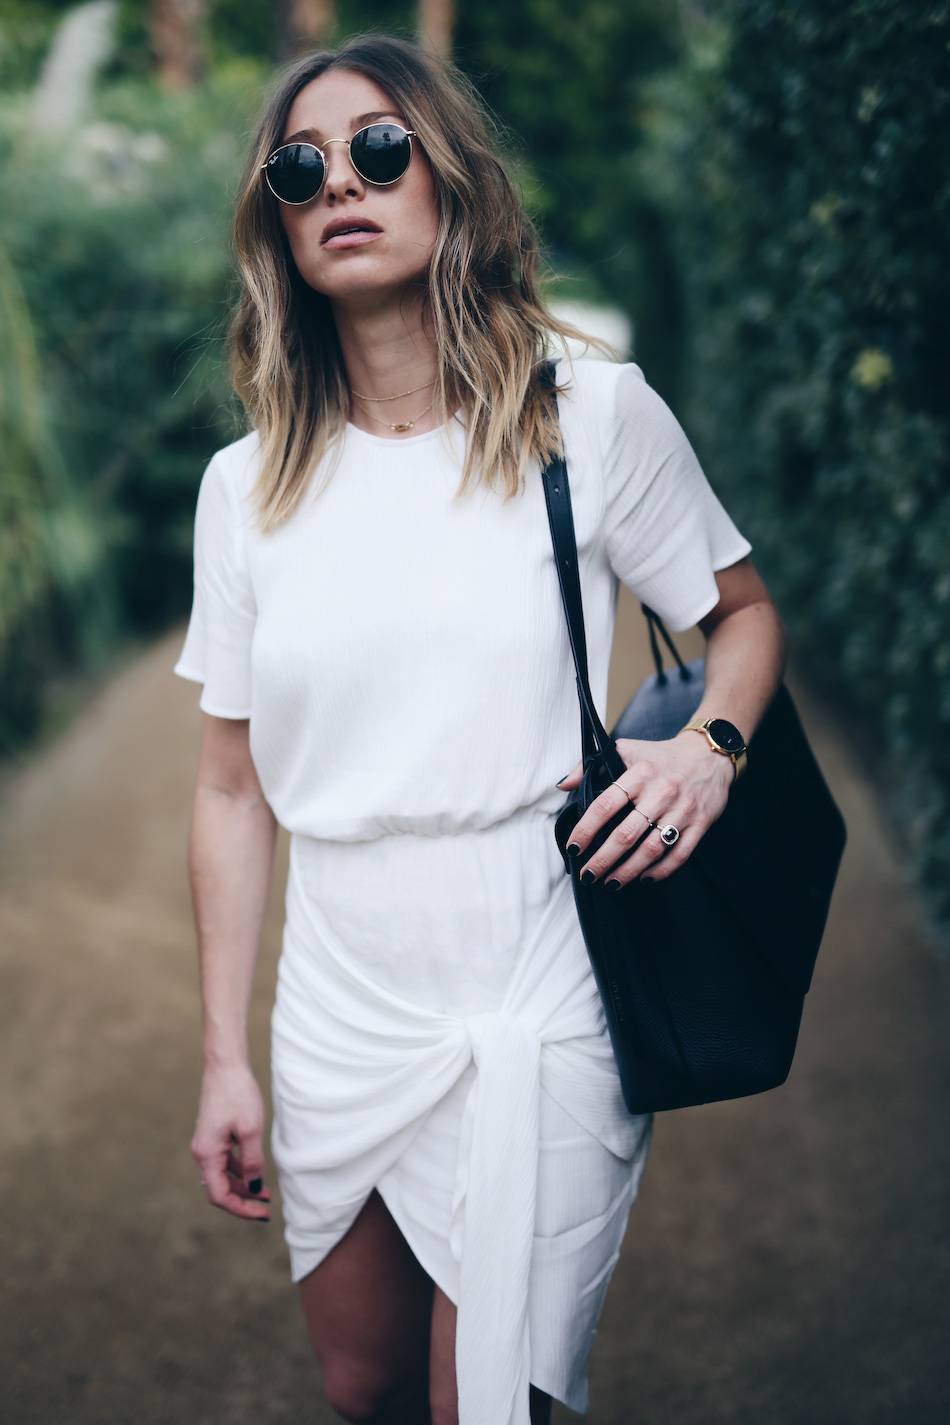 Style-and-beauty-blogger-Jill-Lansky-of-The-August-Diaries-on-self-love-in-white-wrap-Stylestalker-dress-Ray-Ban-round-sunglasses